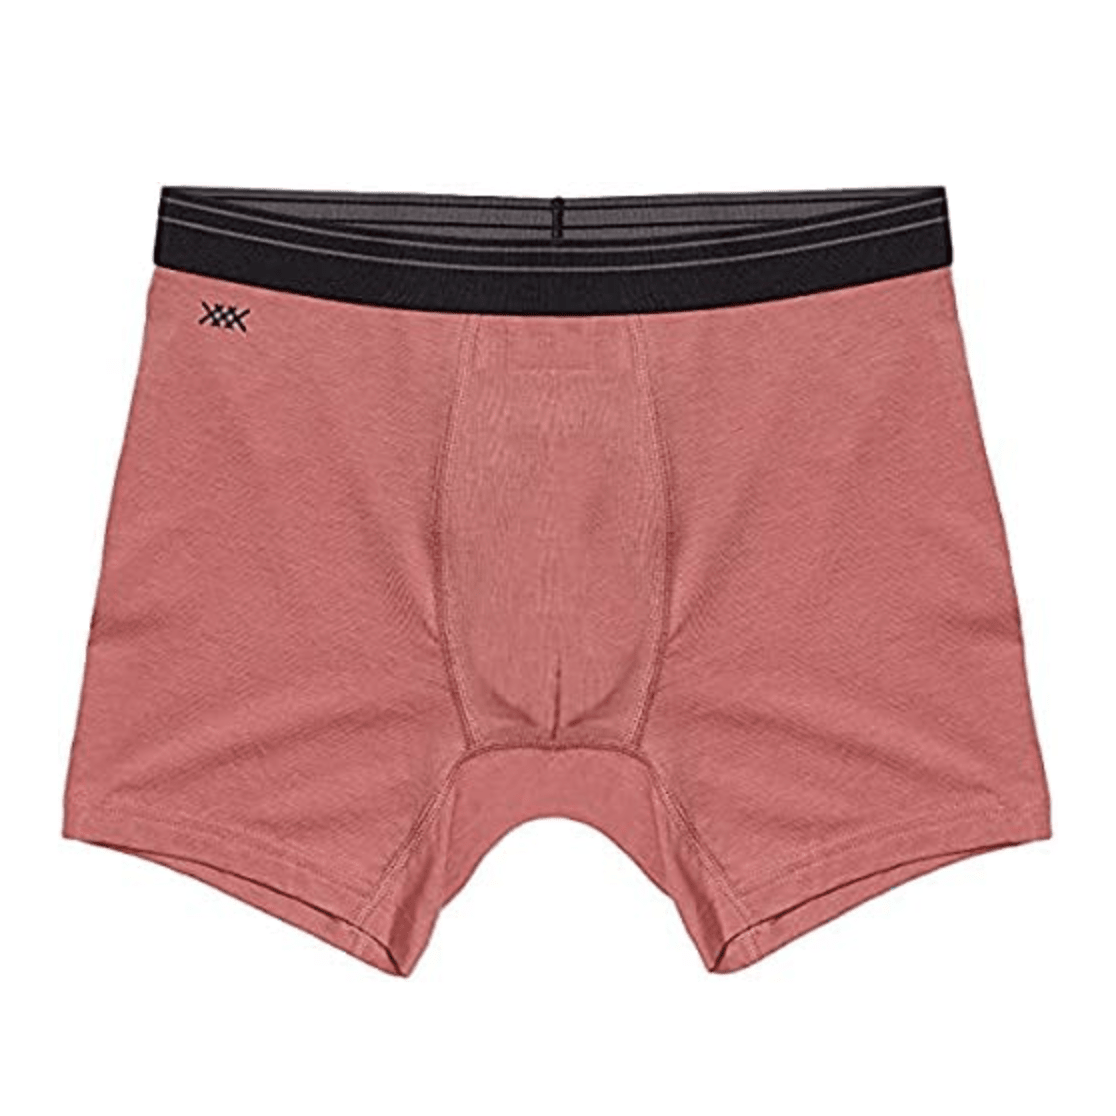 13 Best Underwear For Men 21 Lululemon Uniqlo Tom Ford And More